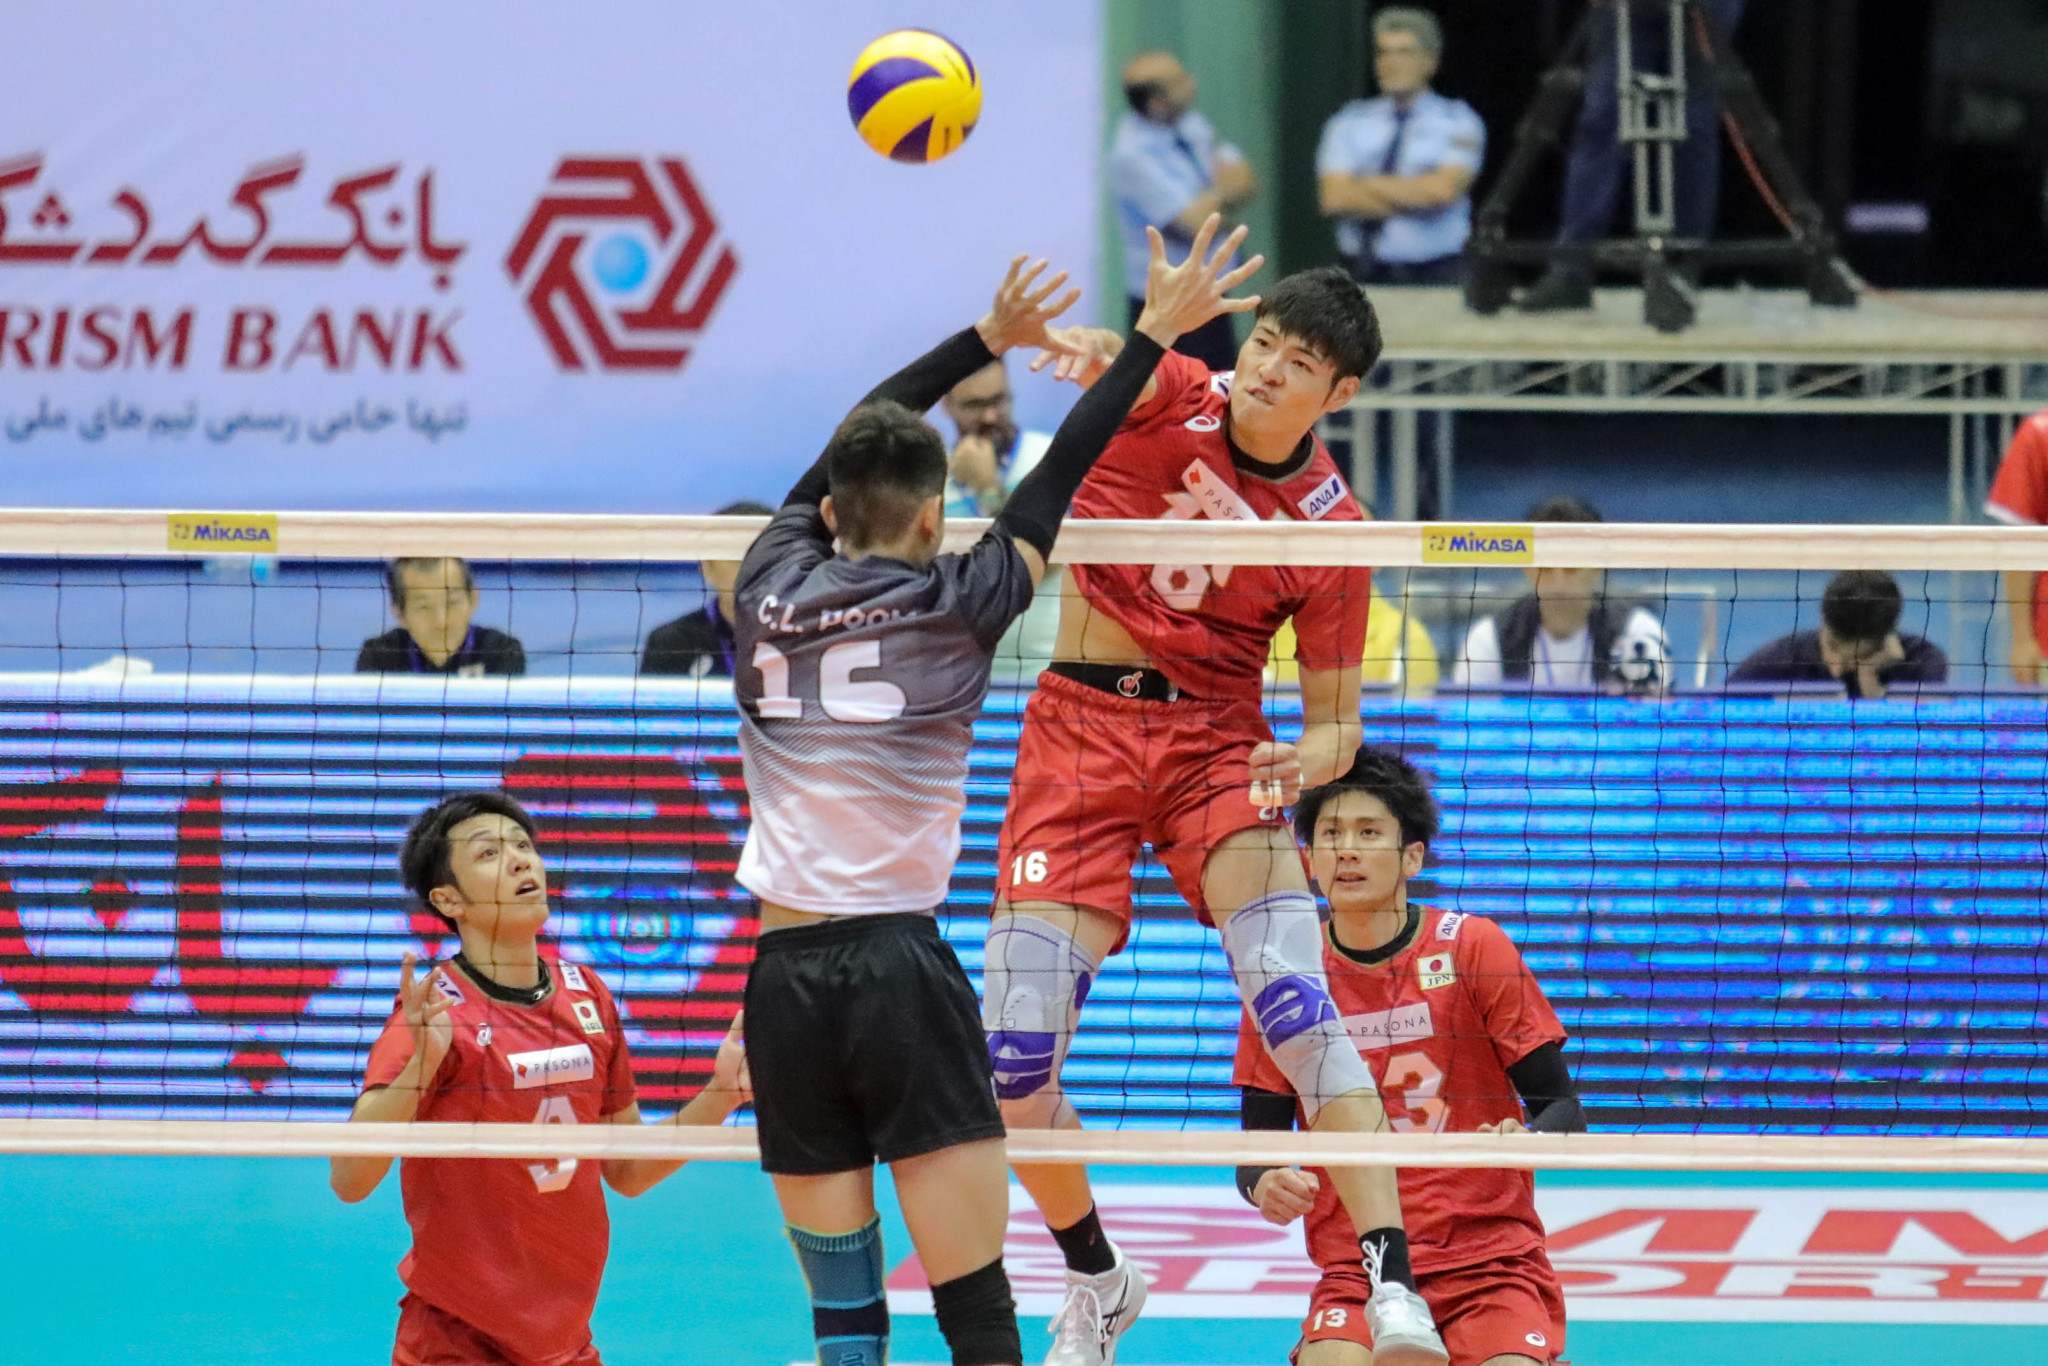 Japan made a dominant start to their defence of the Asian Men's Volleyball title ©AVC